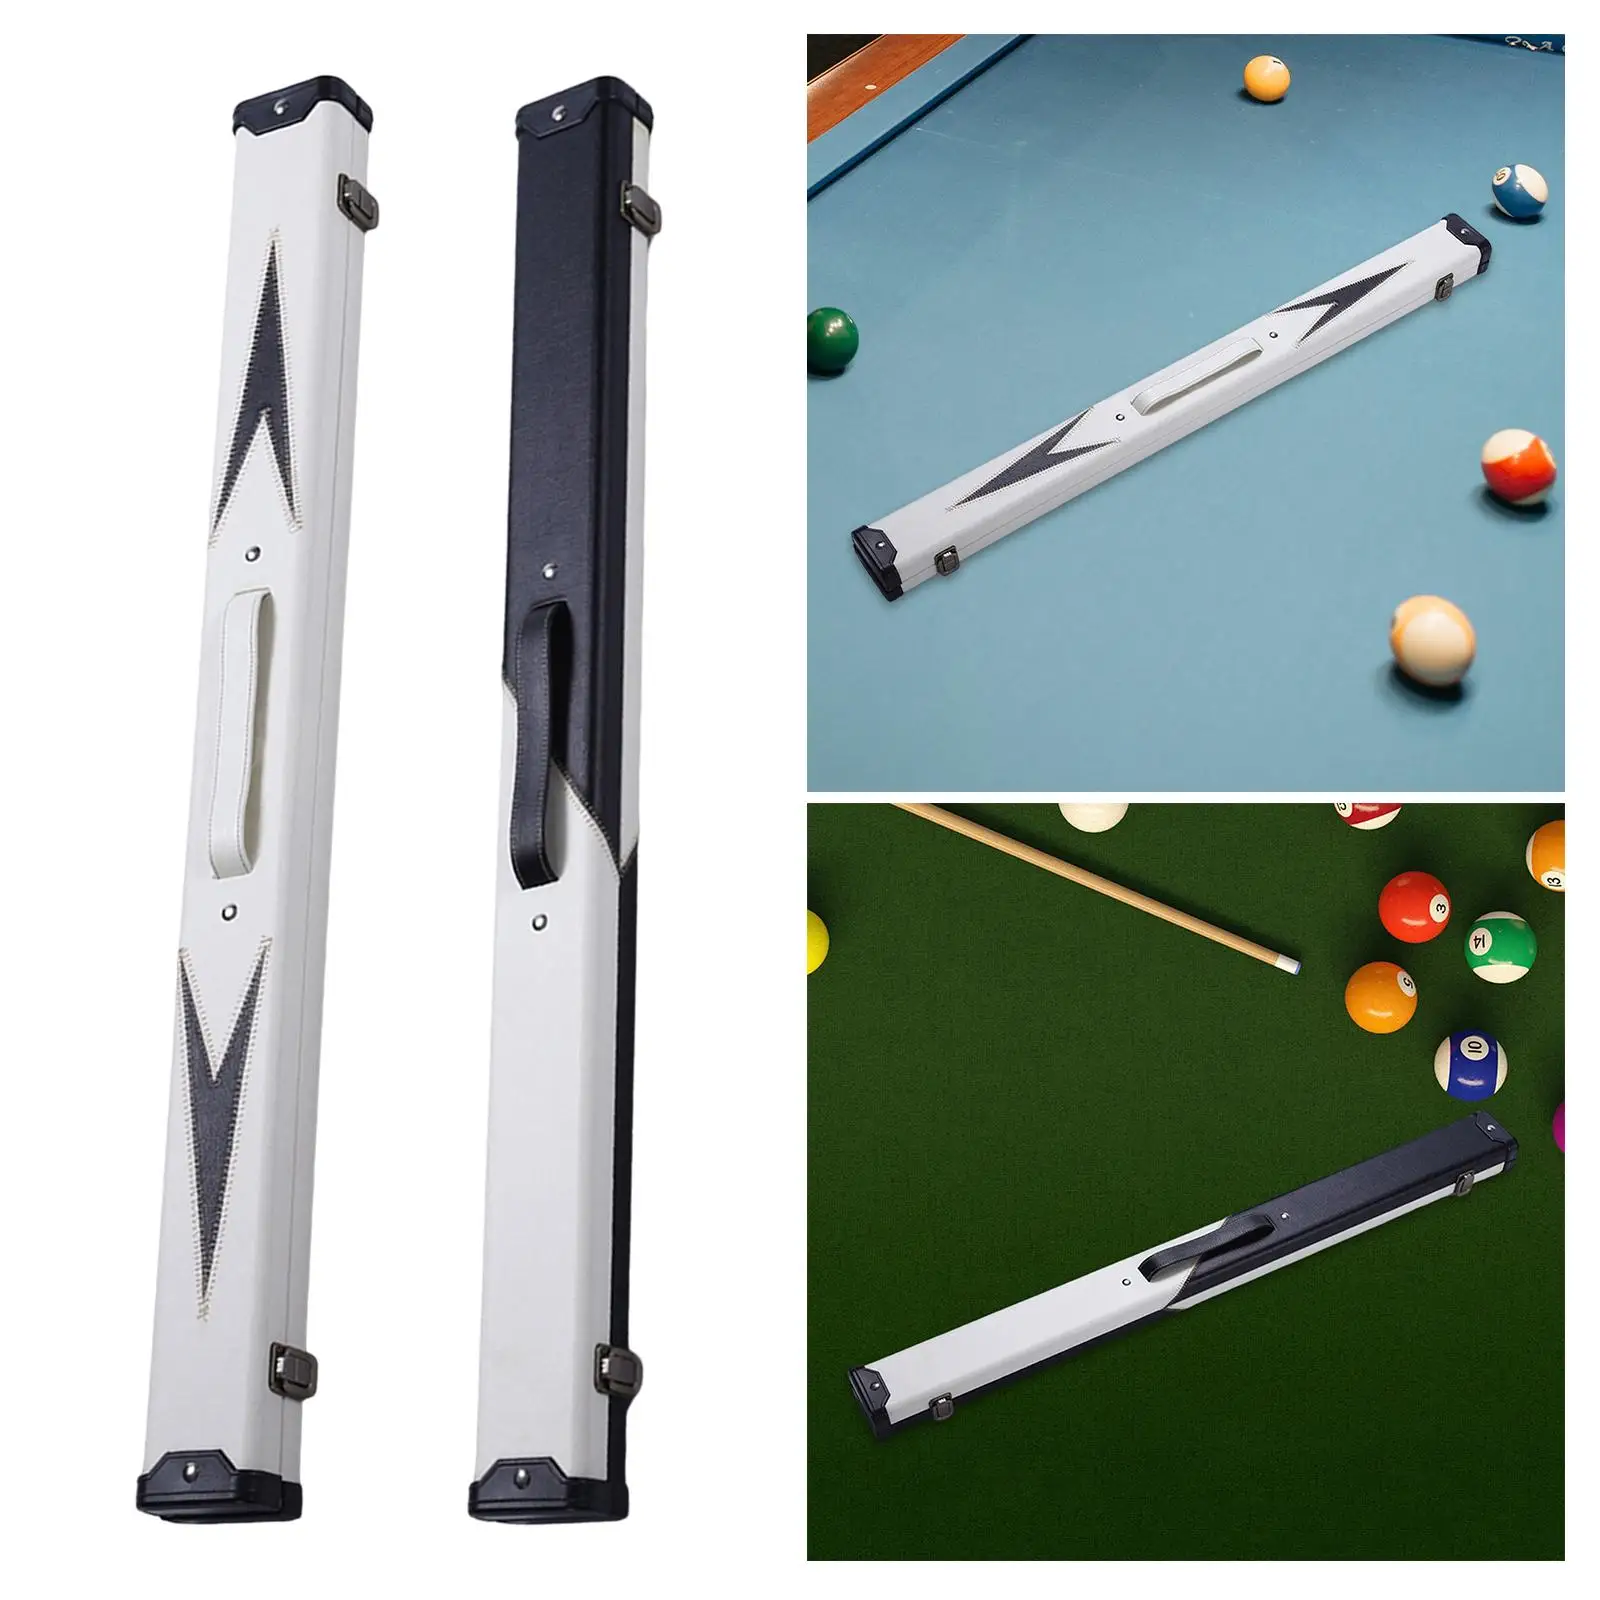 Billiards Pool Hard Case PU Leather Exterior Carrying for 1/2 Snooker